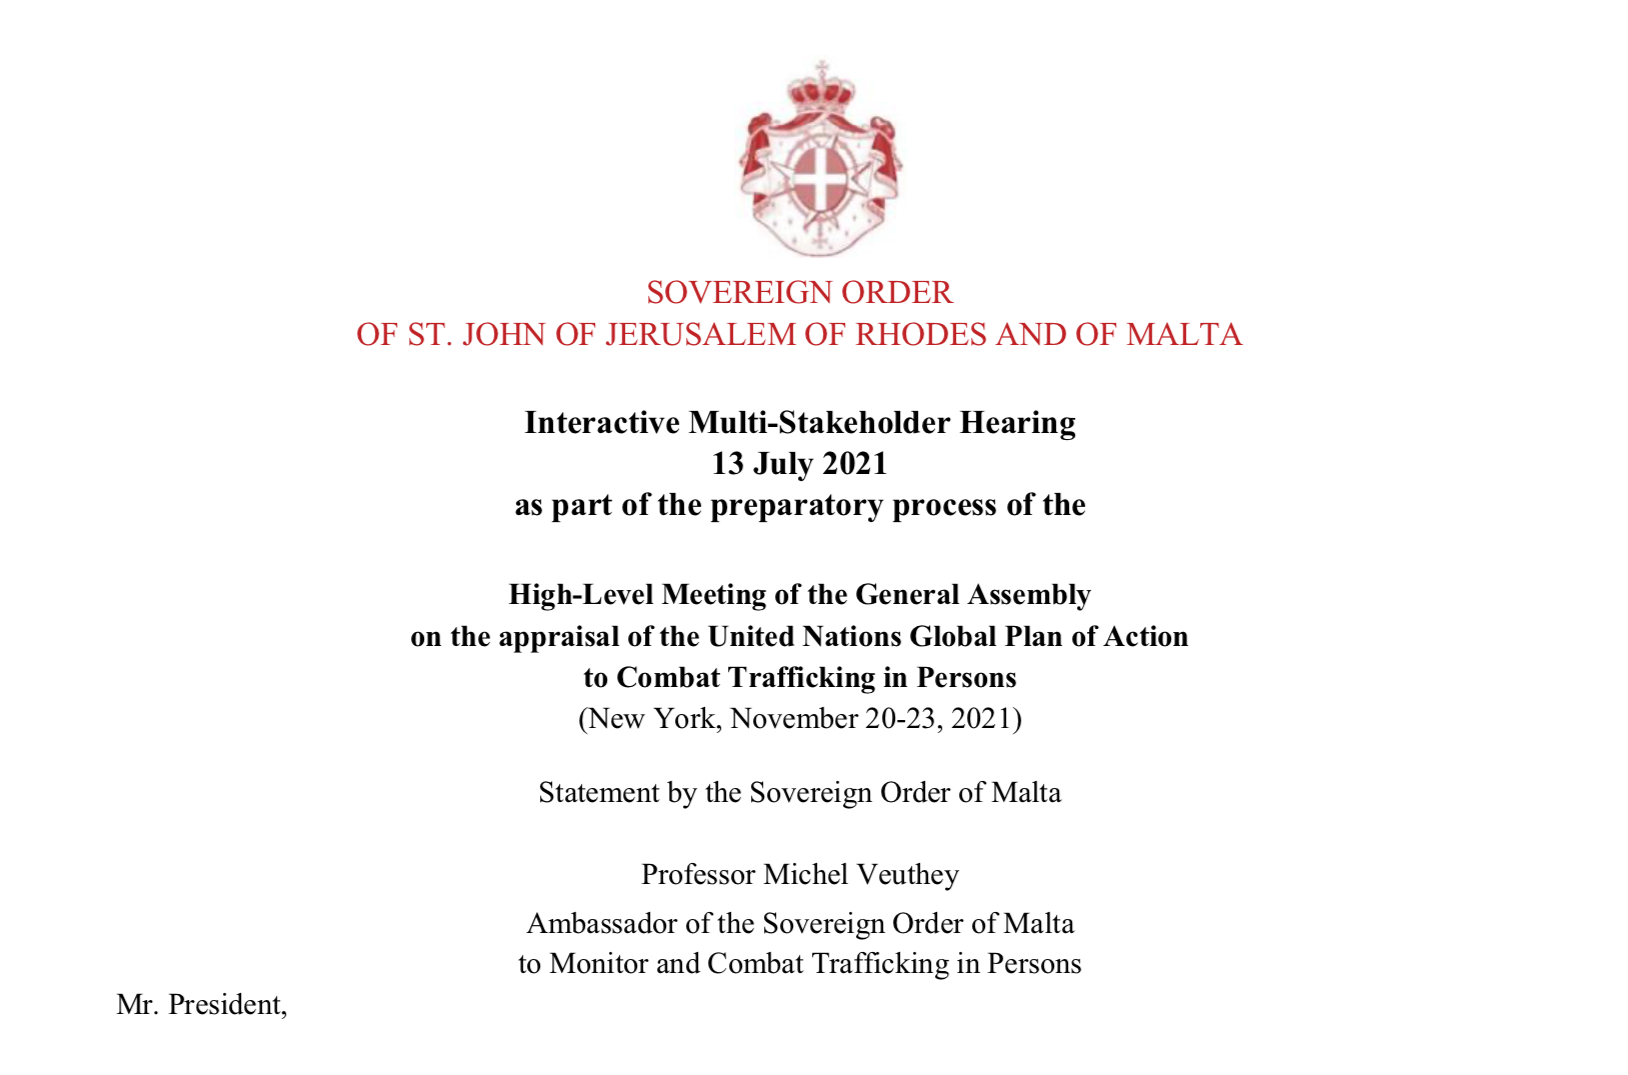 Statement by the Sovereign Order of Malta Ambassador Michel Veuthey- UN New York – Stakeholder Hearing 13 July 2021 as part of the preparatory process of the High-Level Meeting of the General Assembly on the appraisal of the United Nations Global Plan of Action to Combat Trafficking in Persons